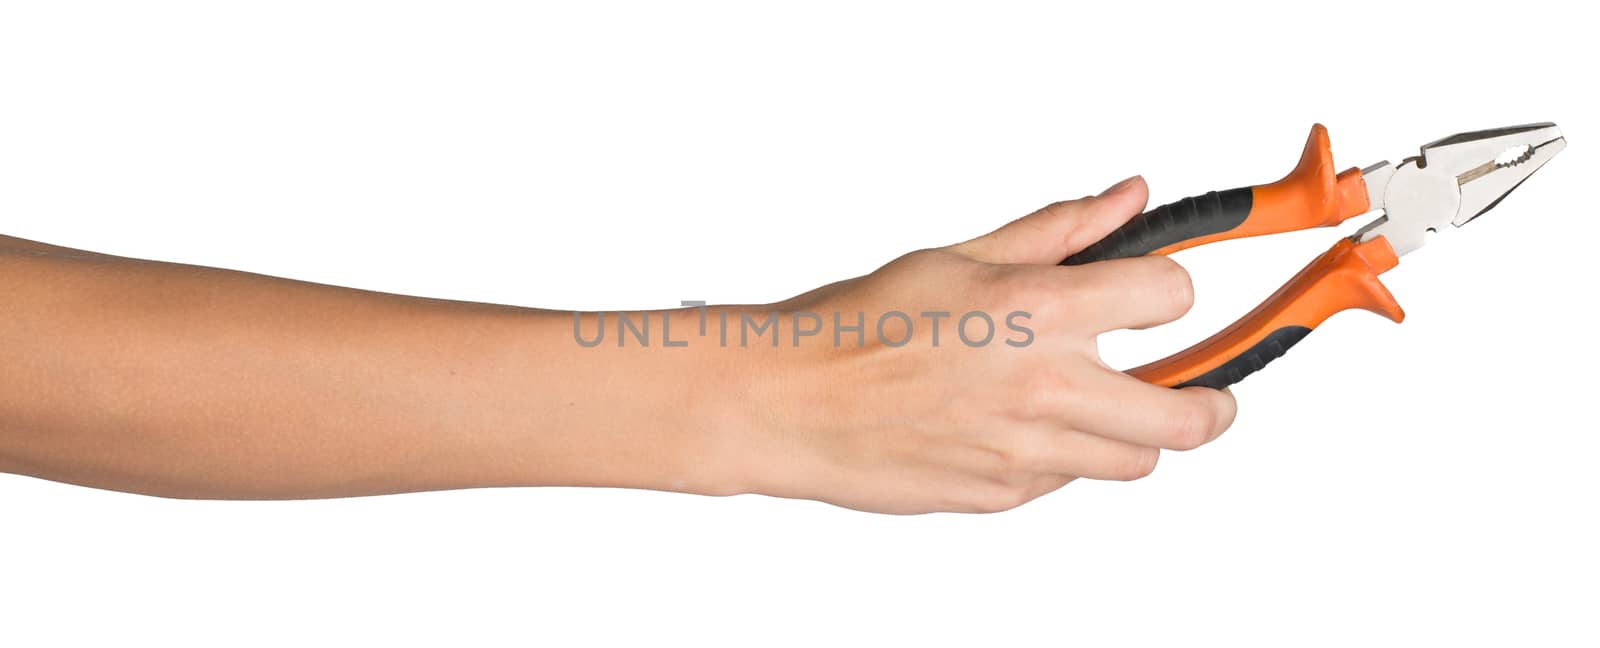 Female hand, bare, holding pliers, isolated over white background